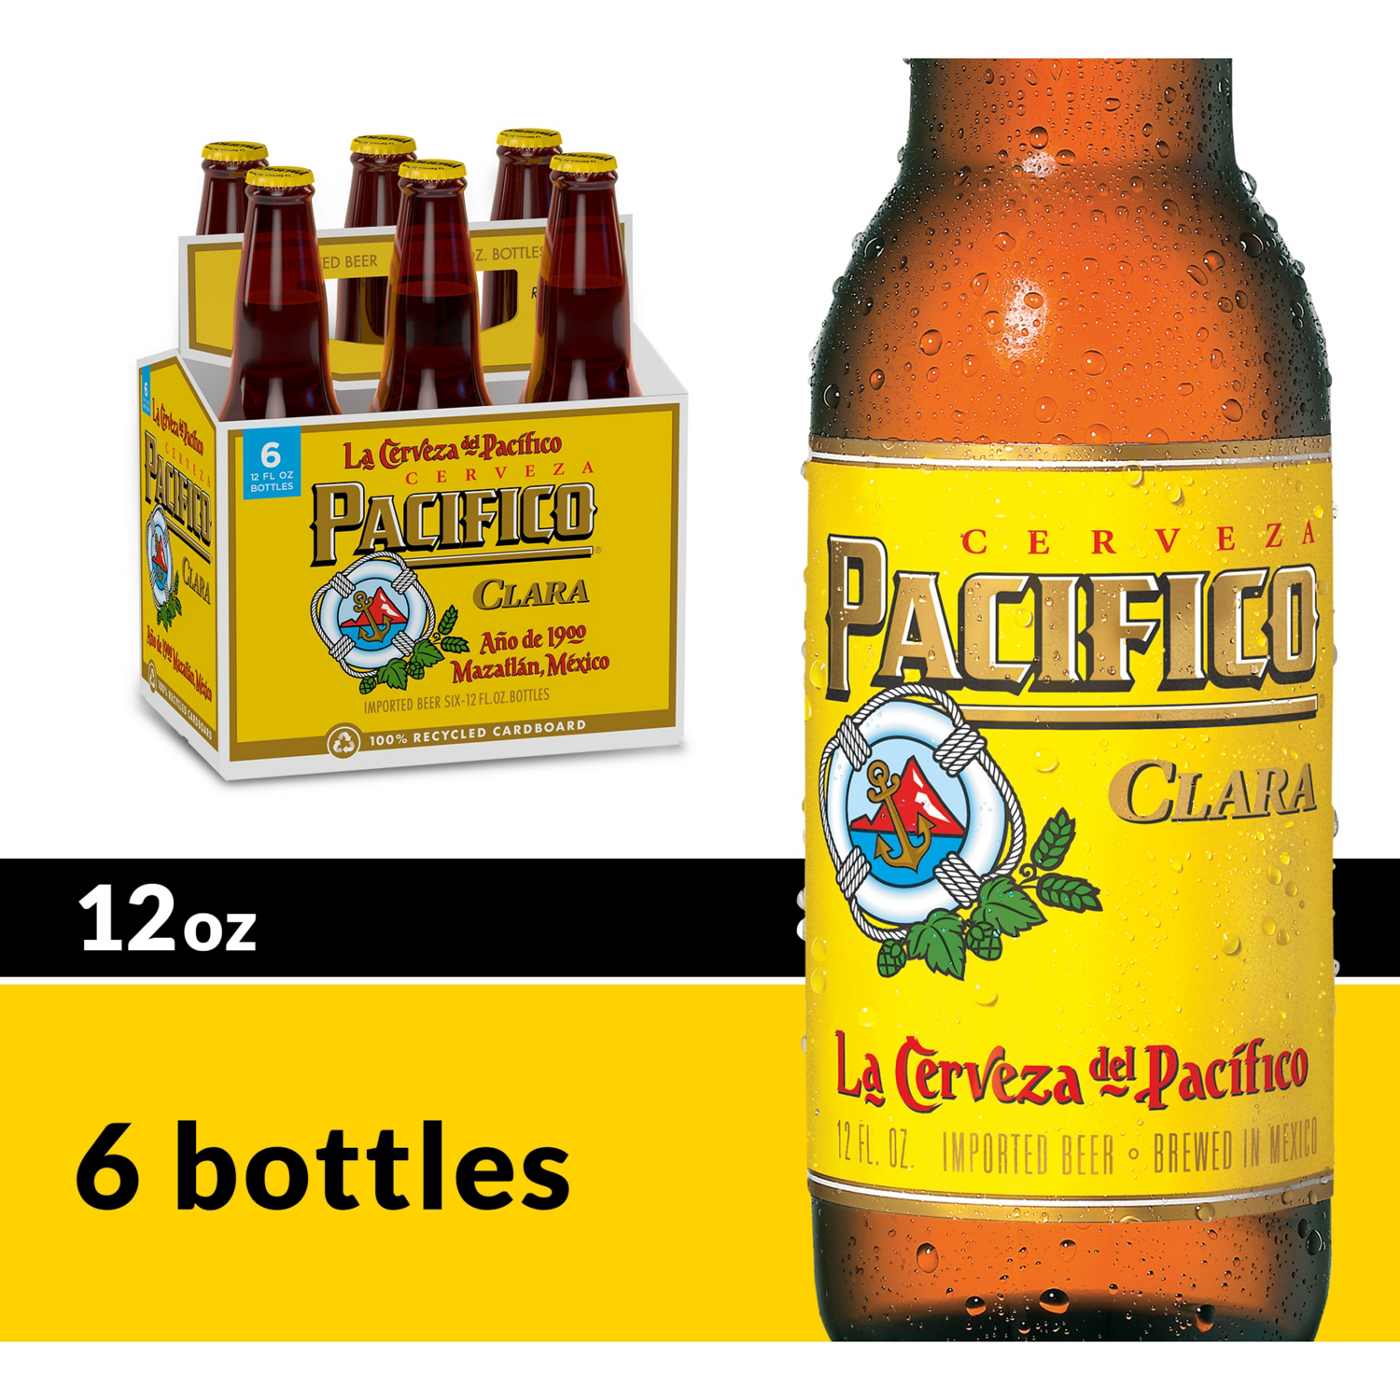 Pacifico Clara Mexican Lager Import Beer 12 oz Bottles, 6 pk; image 7 of 10